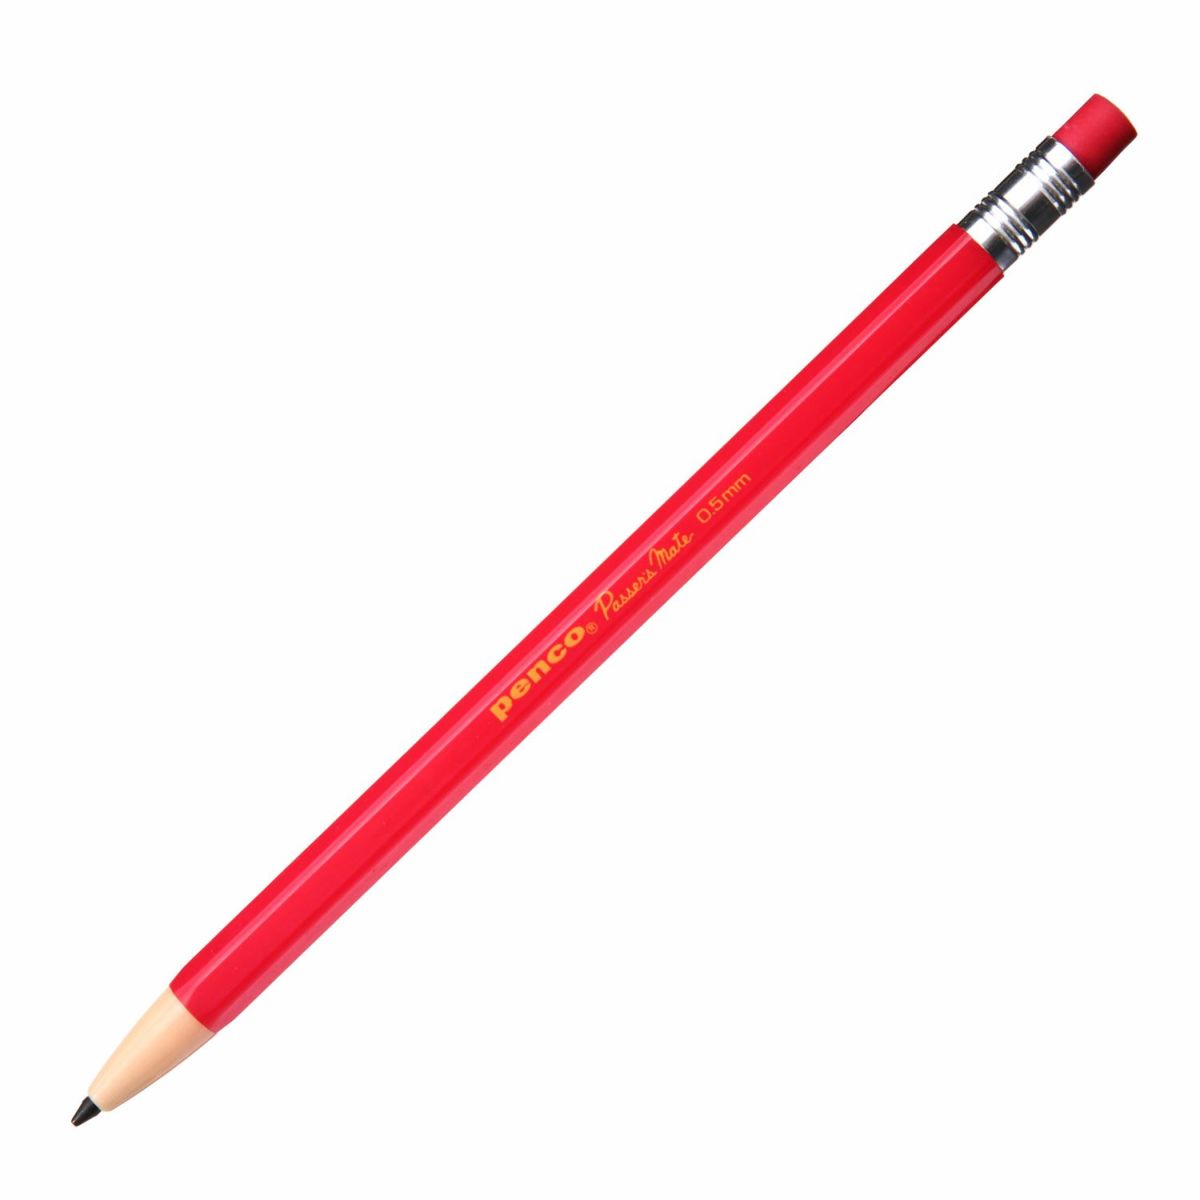 Passers Mate Pen // All Colors